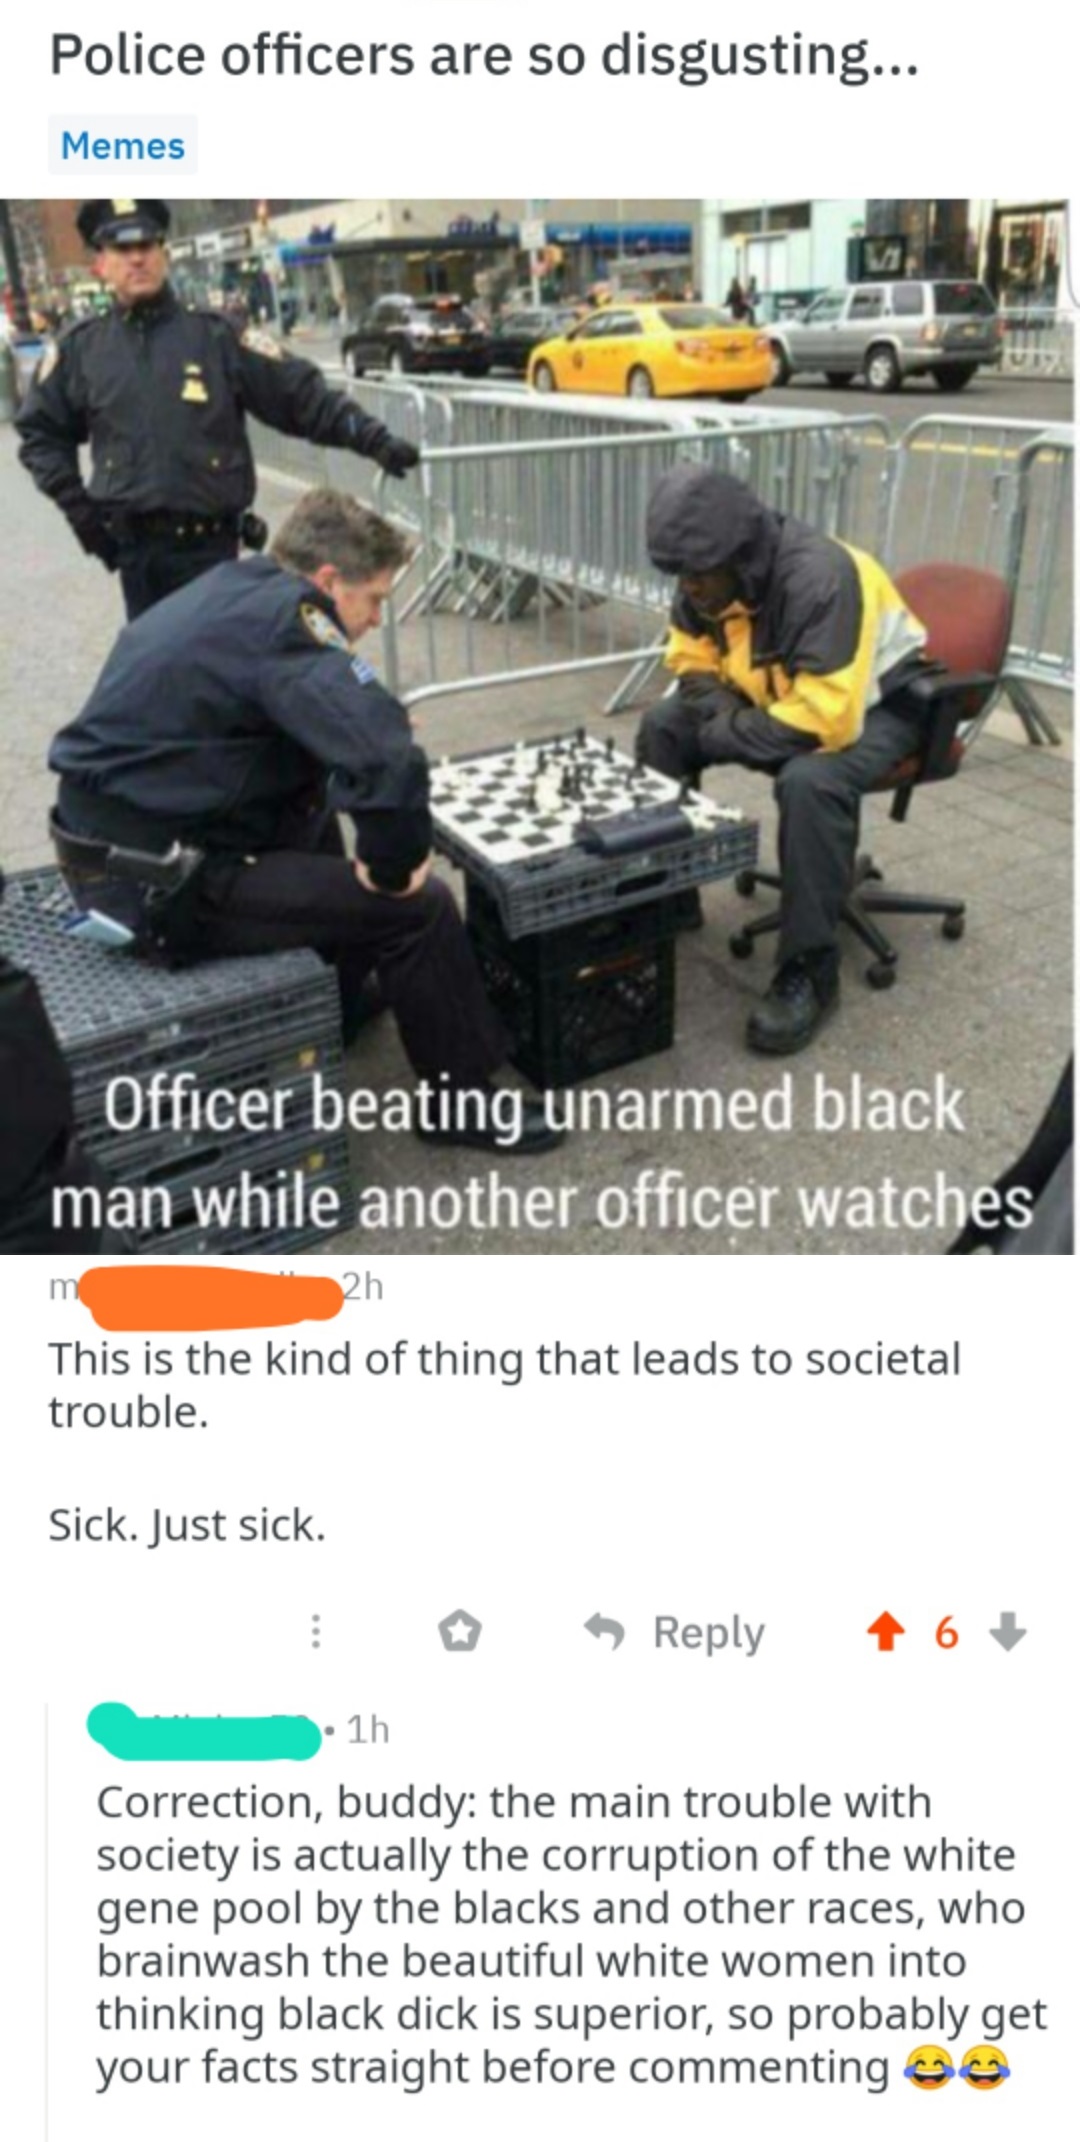 white cop memes - Police officers are so disgusting... Memes D Officer beating unarmed black man while another officer watches 2h This is the kind of thing that leads to societal trouble. Sick. Just sick. 6 1h Correction, buddy the main trouble with socie